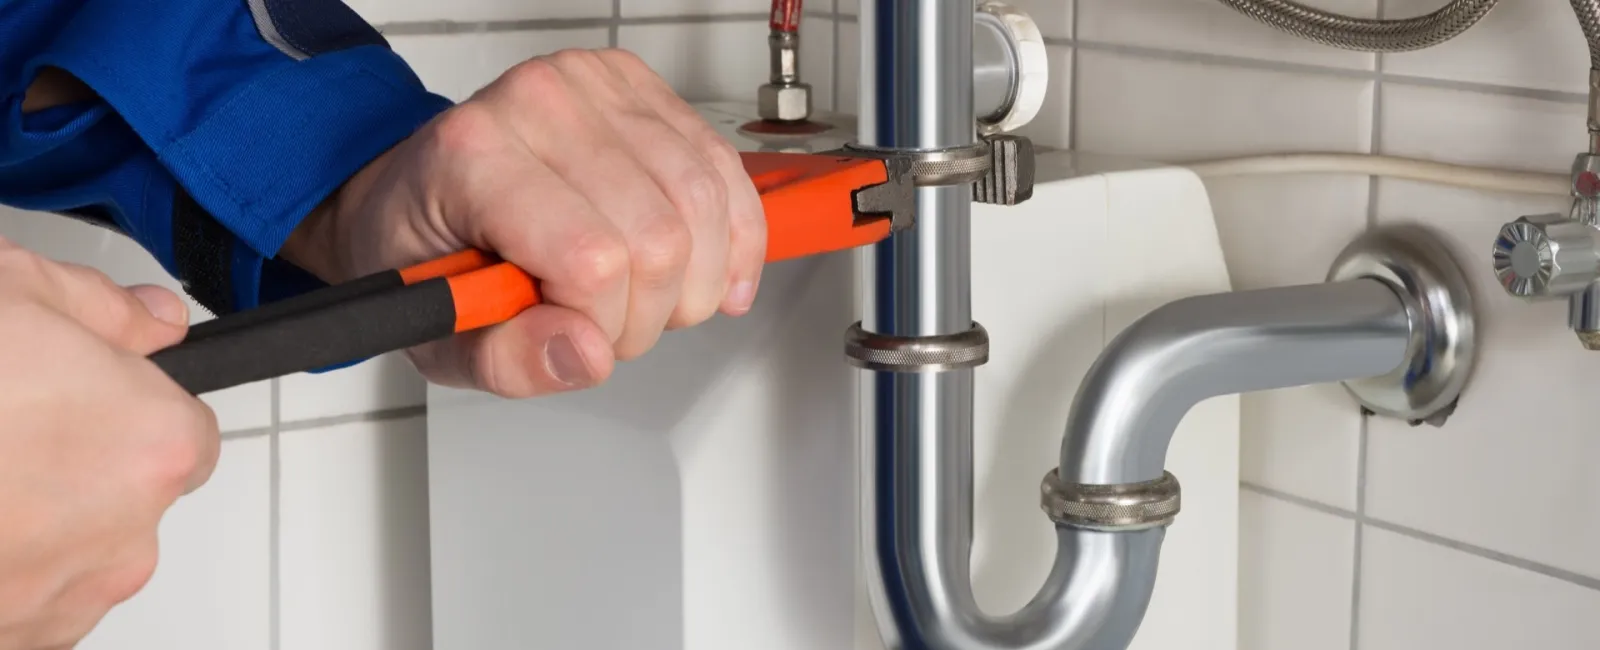 Wondering how to snake a drain? Your plumber can help